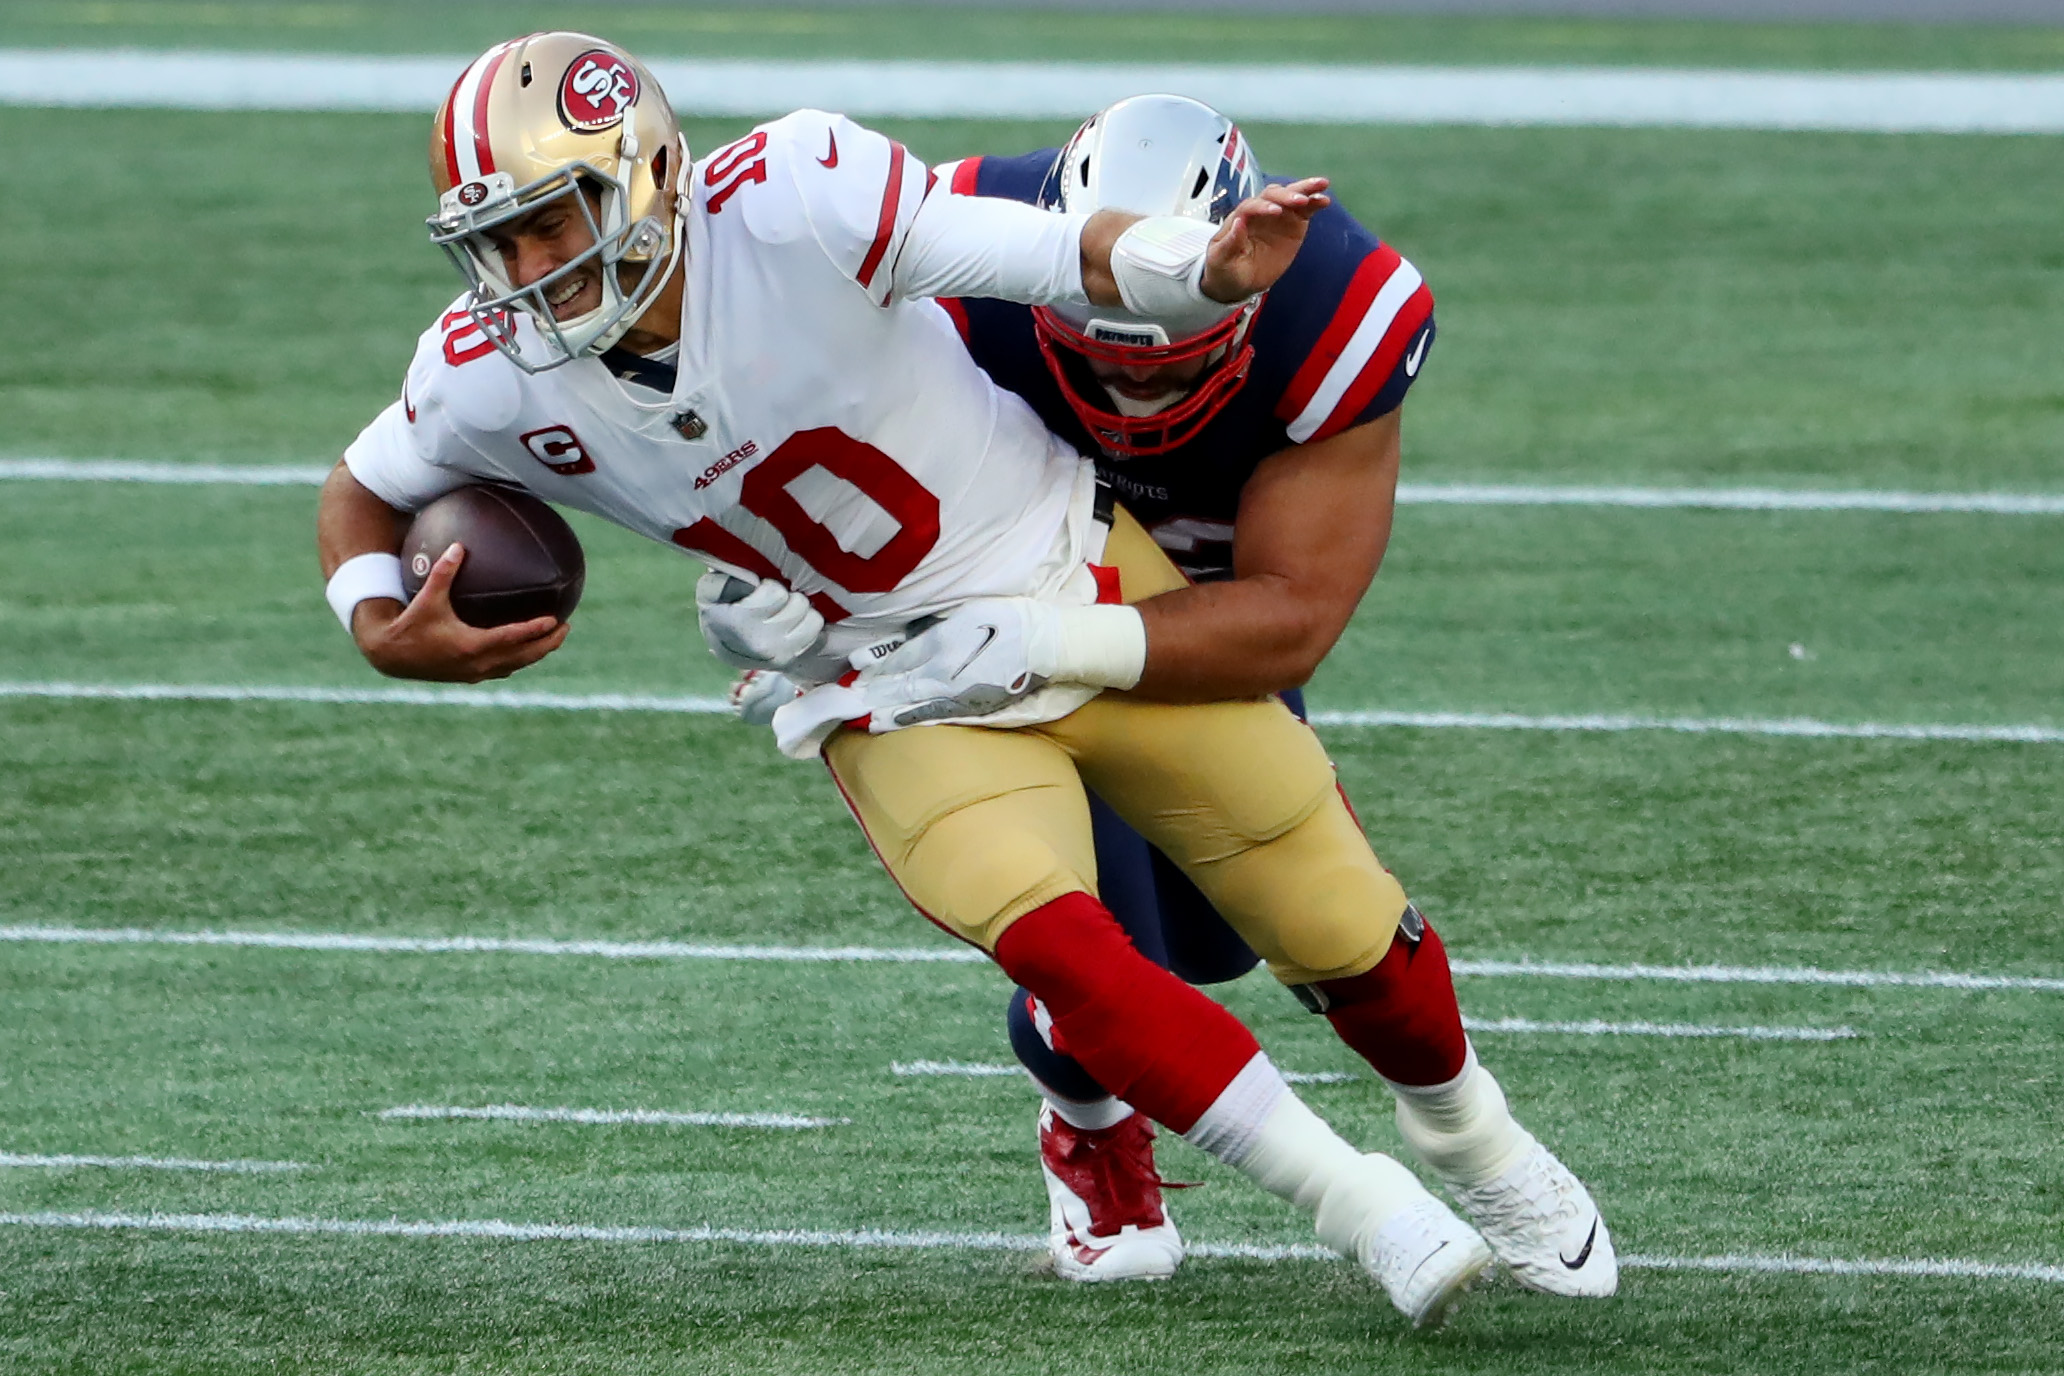 Is Jimmy Garoppolo Running Out of Time to Prove He Deserves the Starting QB Job?